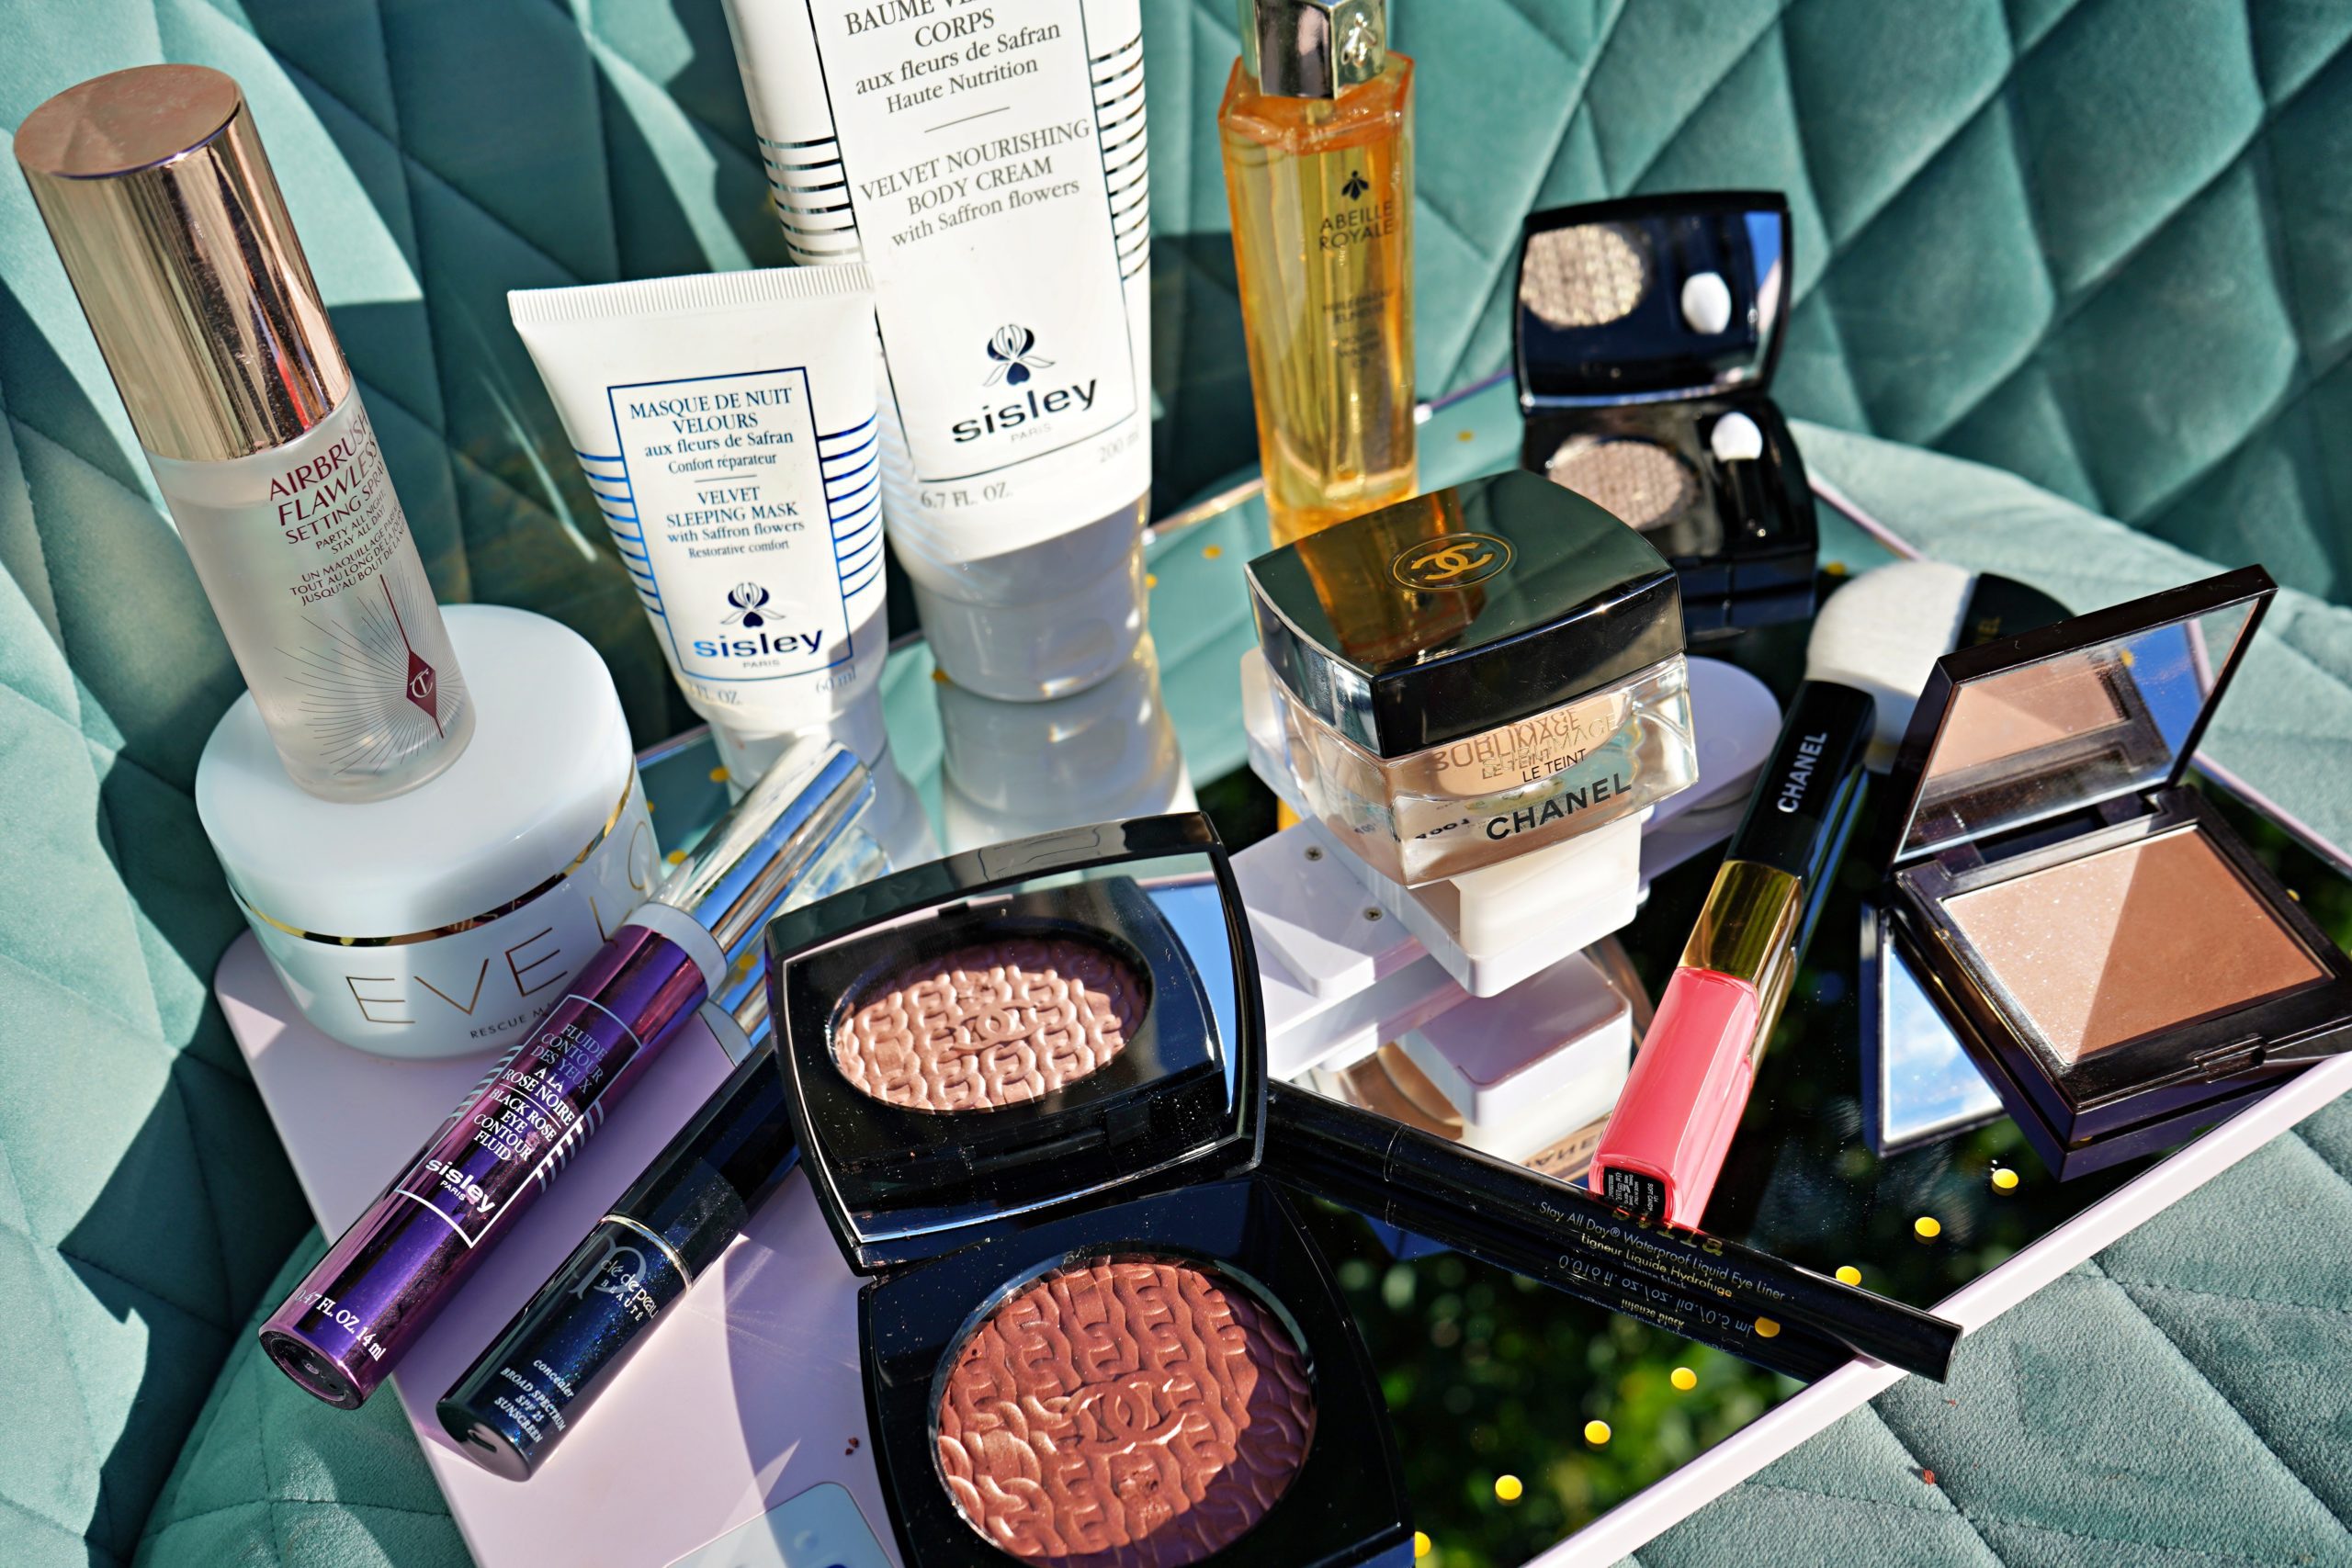 A Classic Chanel Beauty Look + Other Recent Favorites from Nordstrom